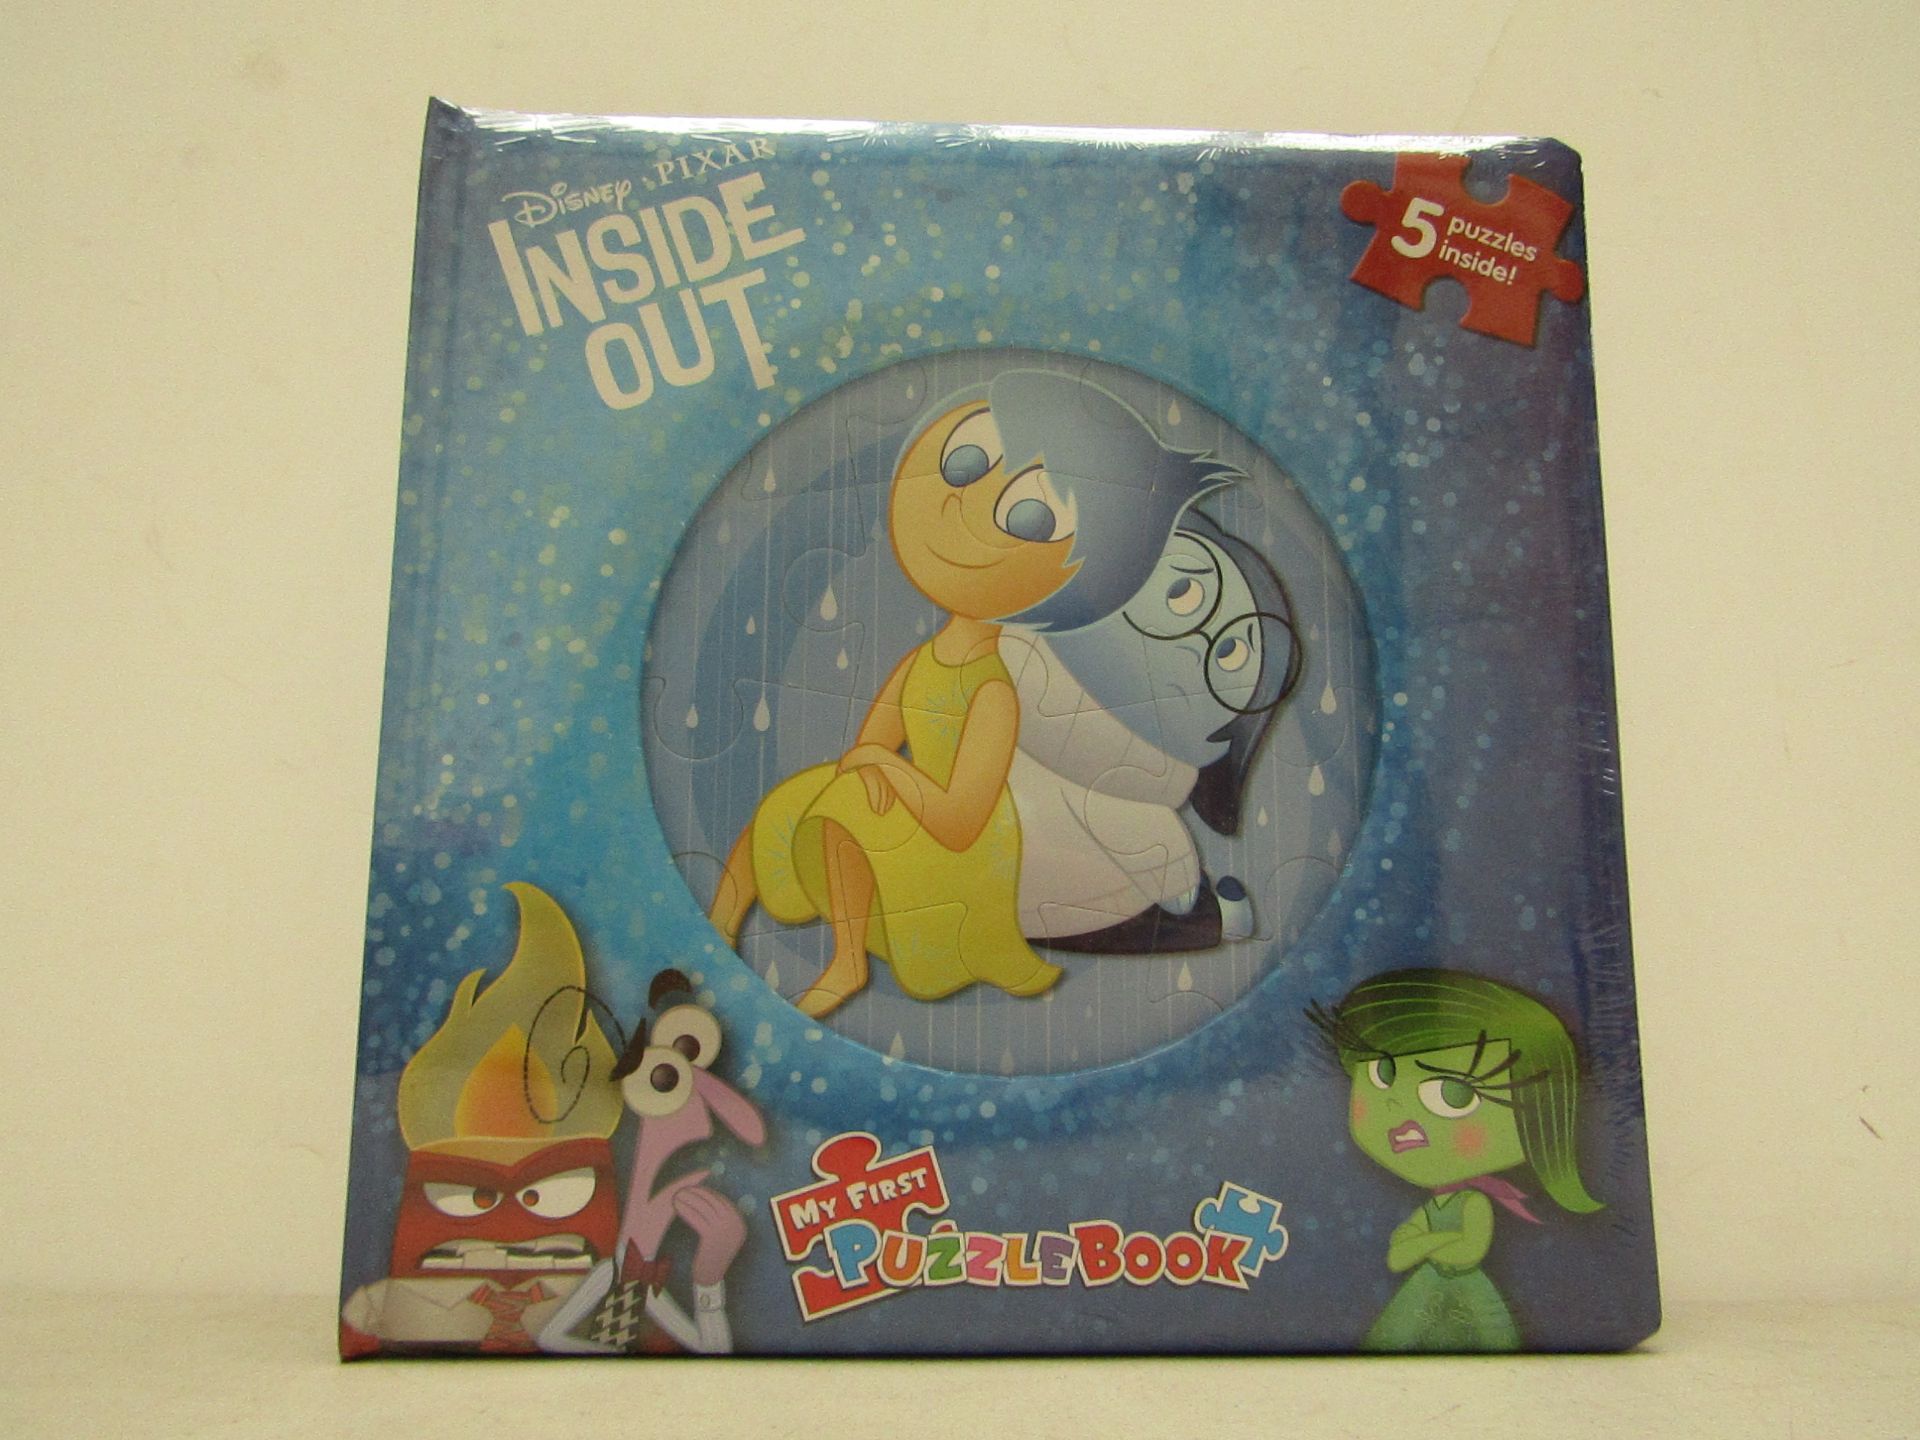 Box of 12x Disney Pixar Inside Out book containing 5 puzzles, new and packaged.